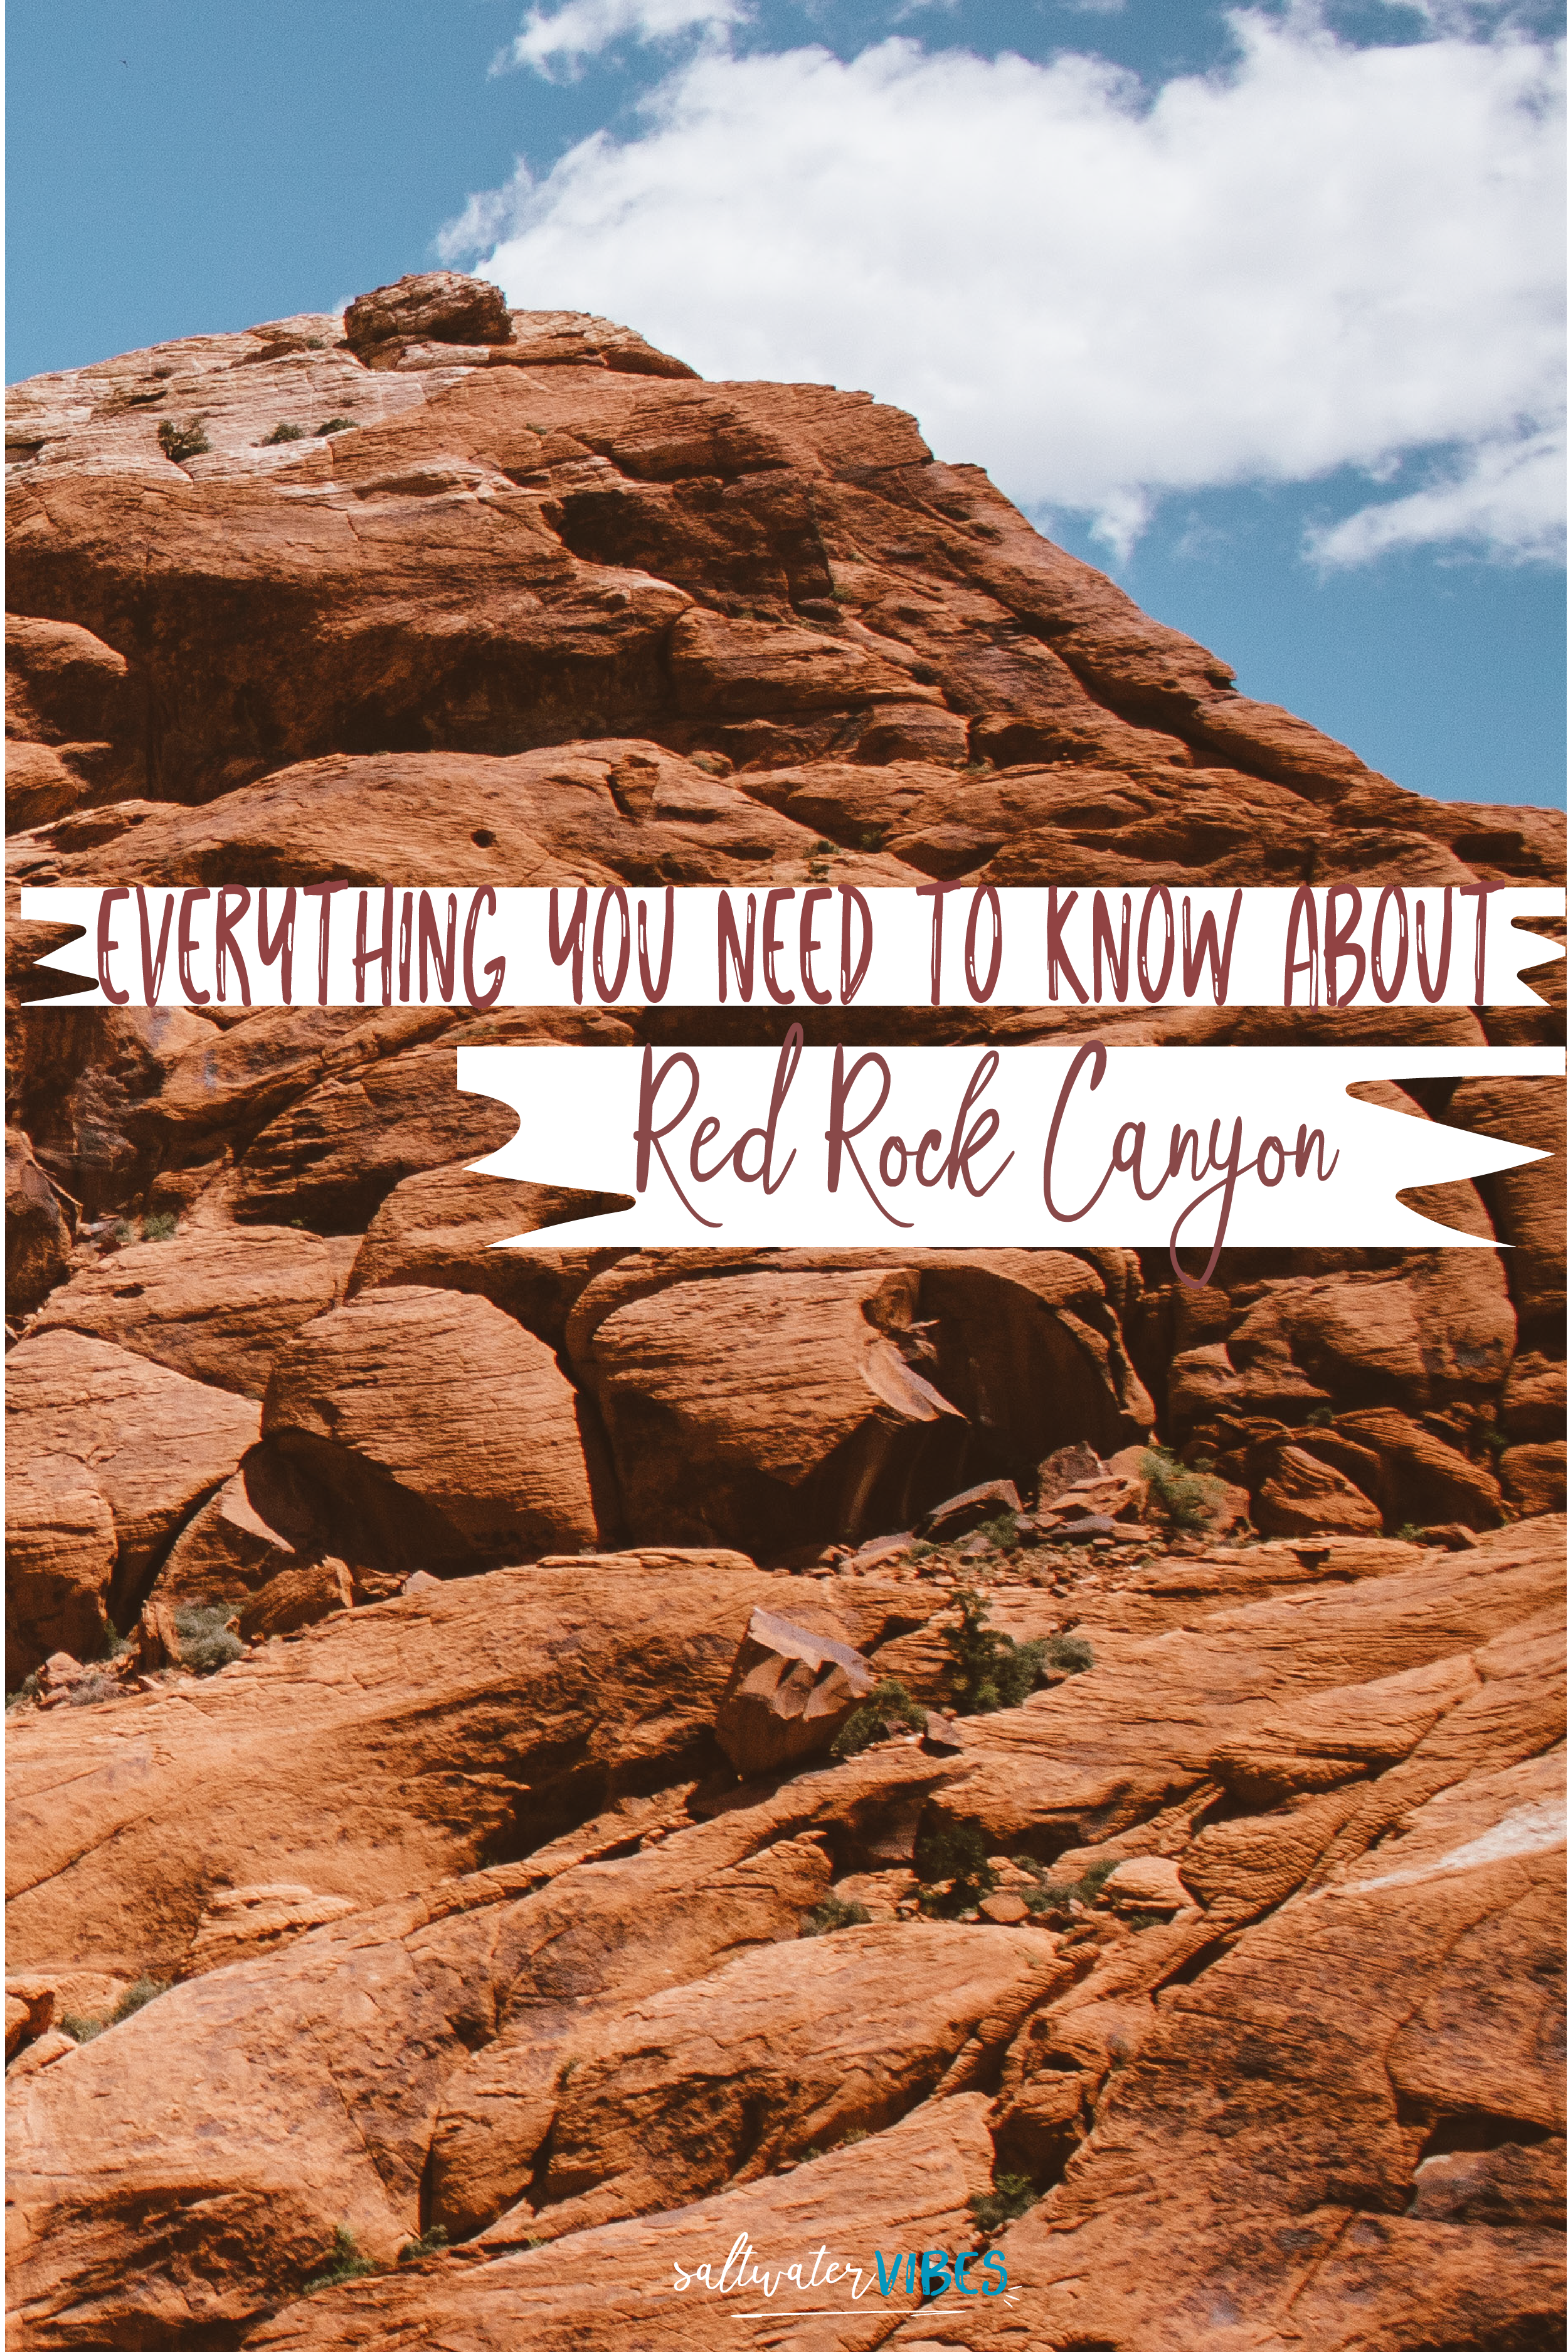 Red Rock Canyon | SaltWaterVibes